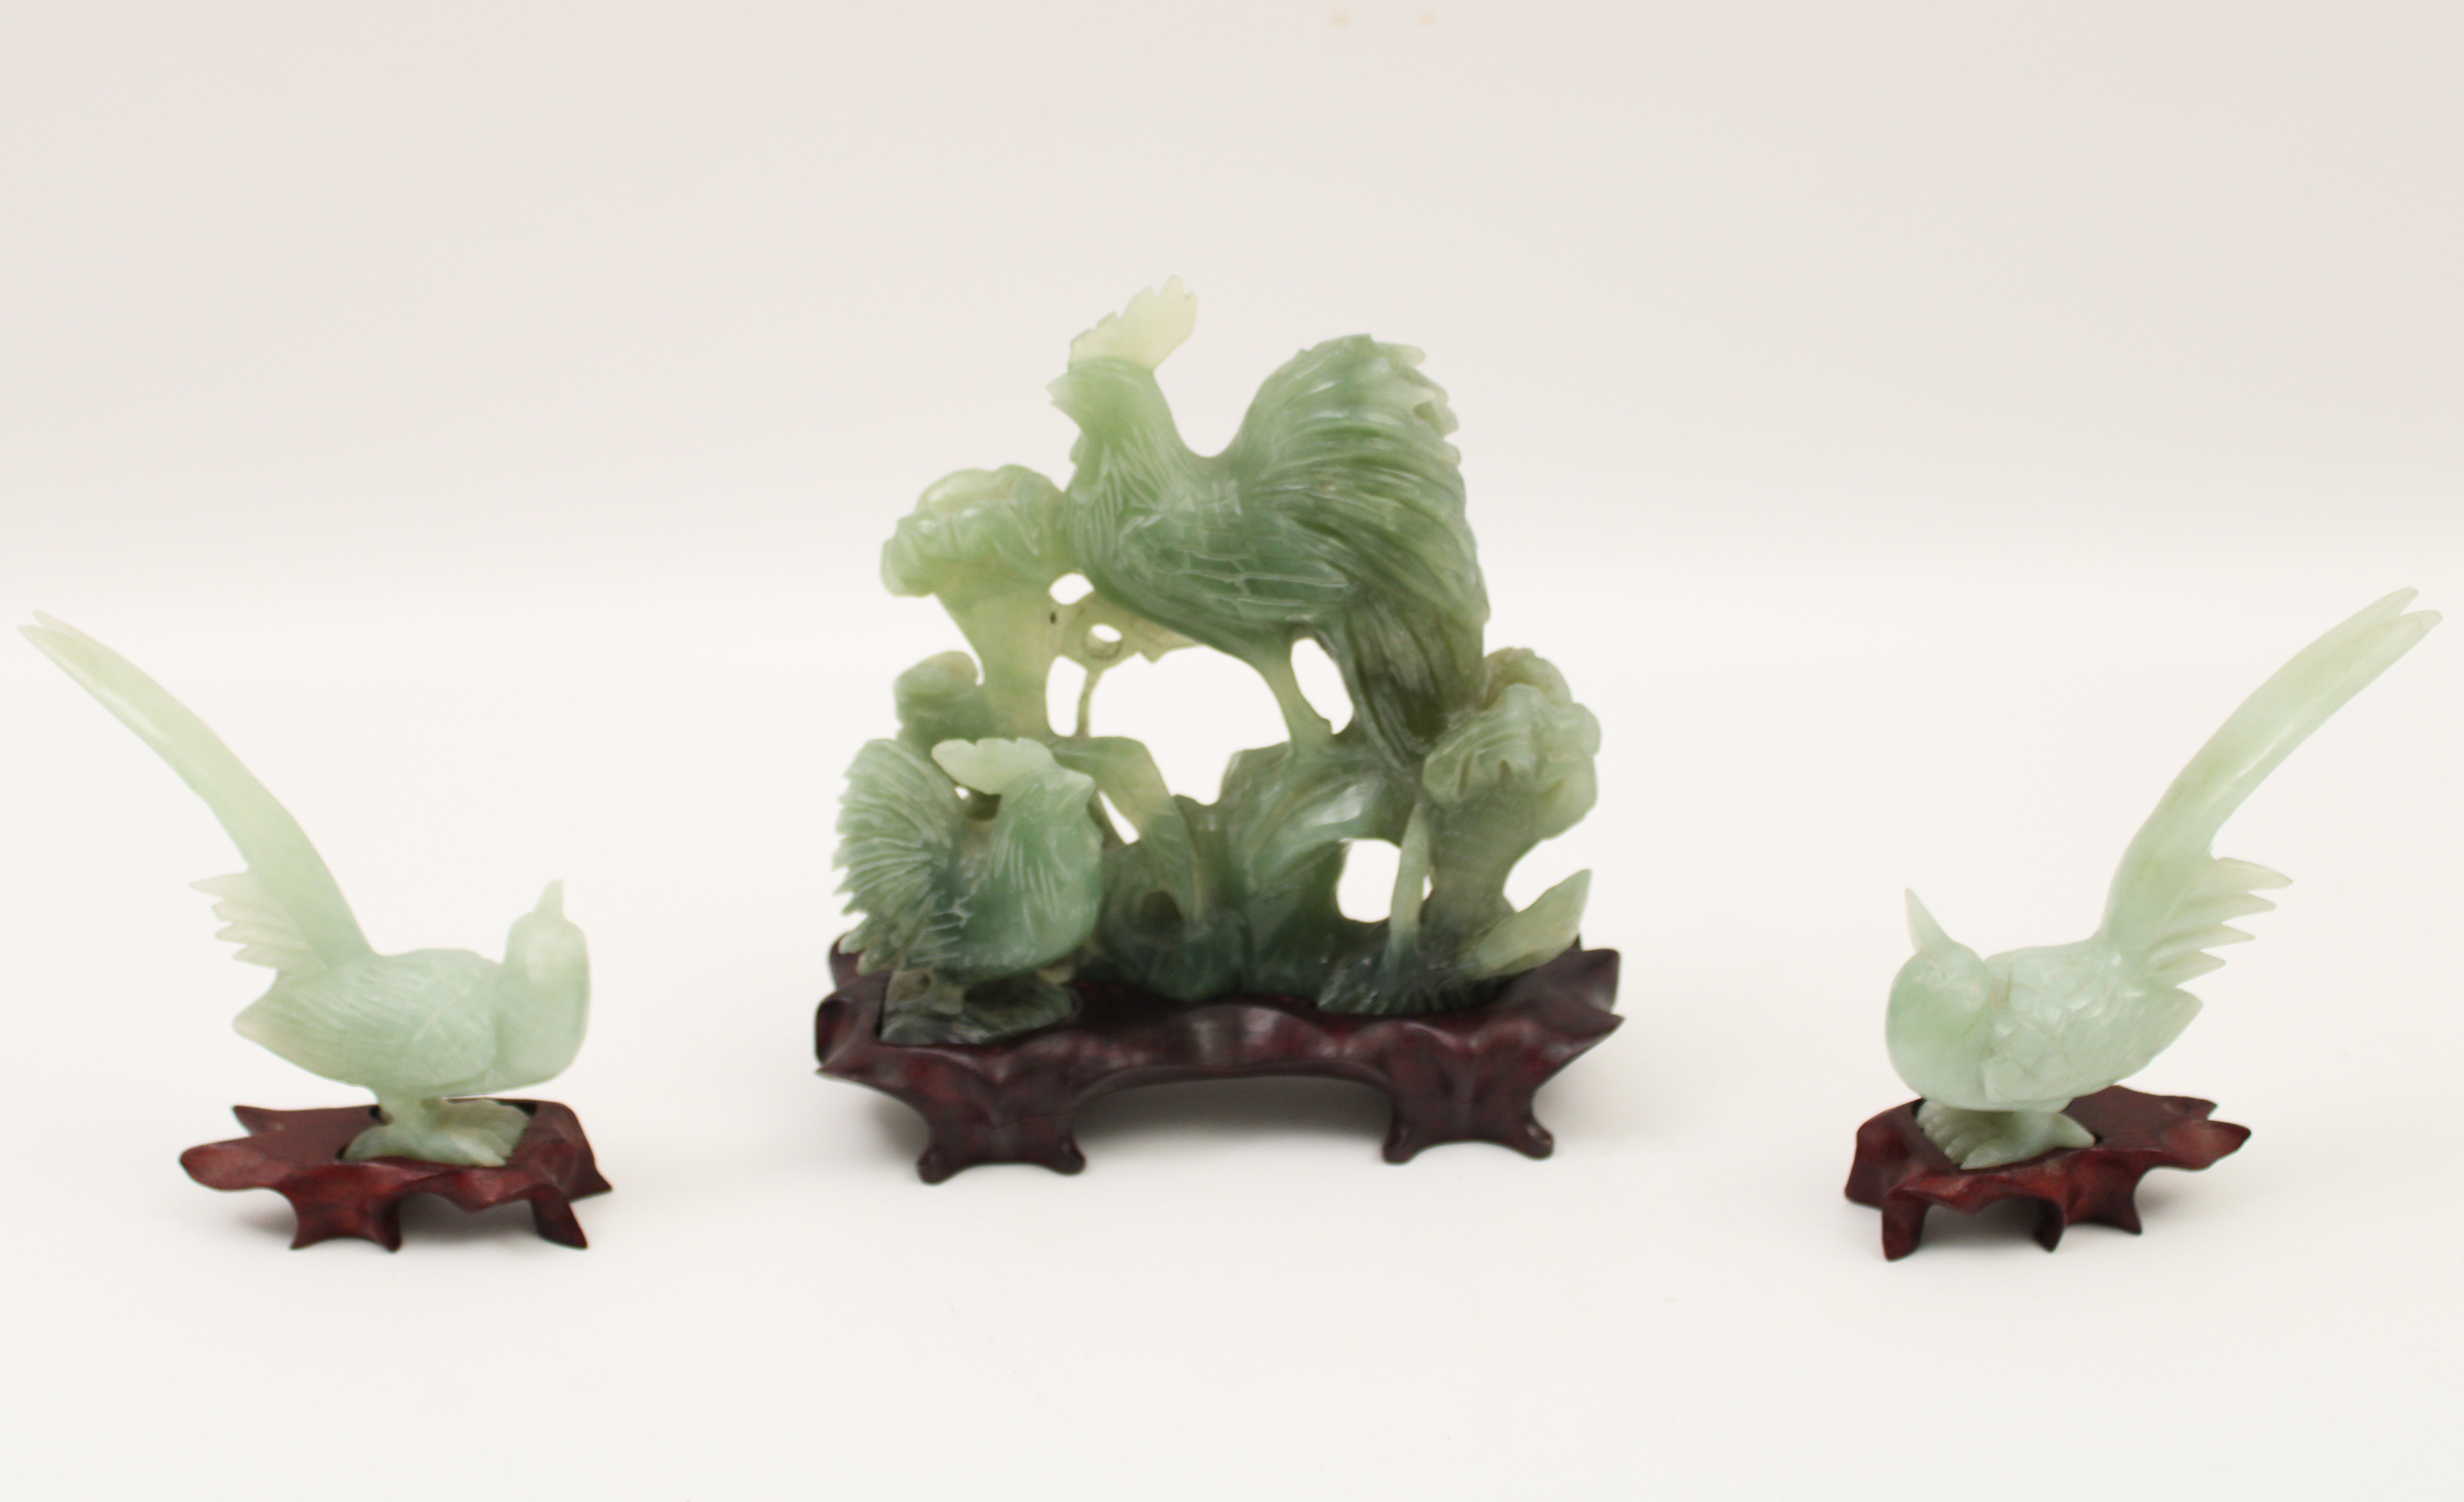 GROUP OF 3 CHINESE JADE FIGURES 35e75b